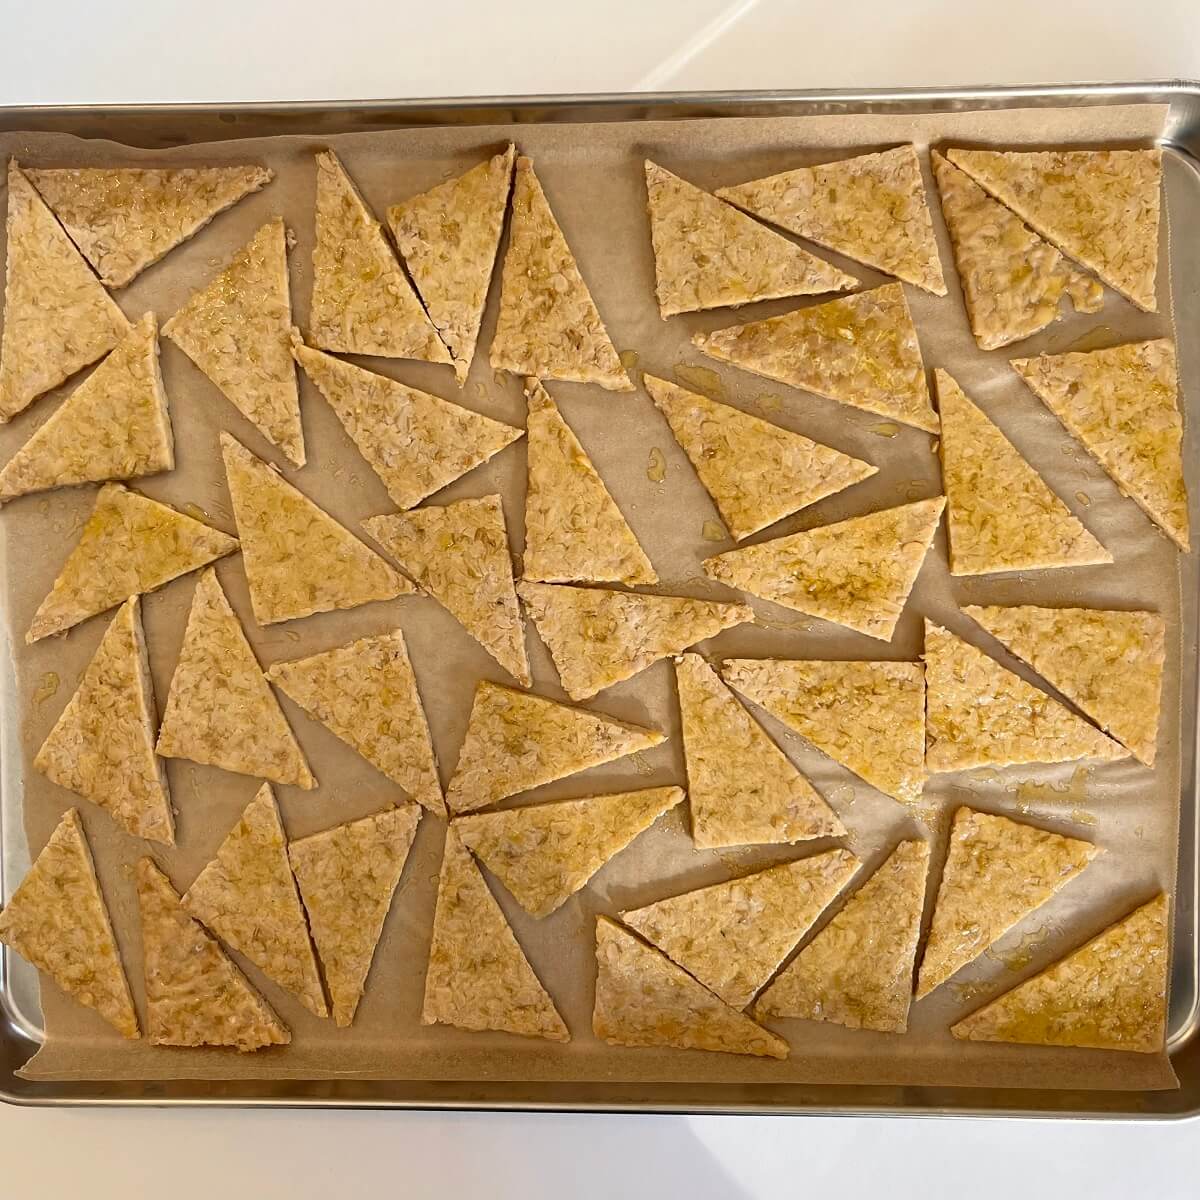 Tempeh pieces basted with oil and spices on a sheet pan lined with parchment paper.